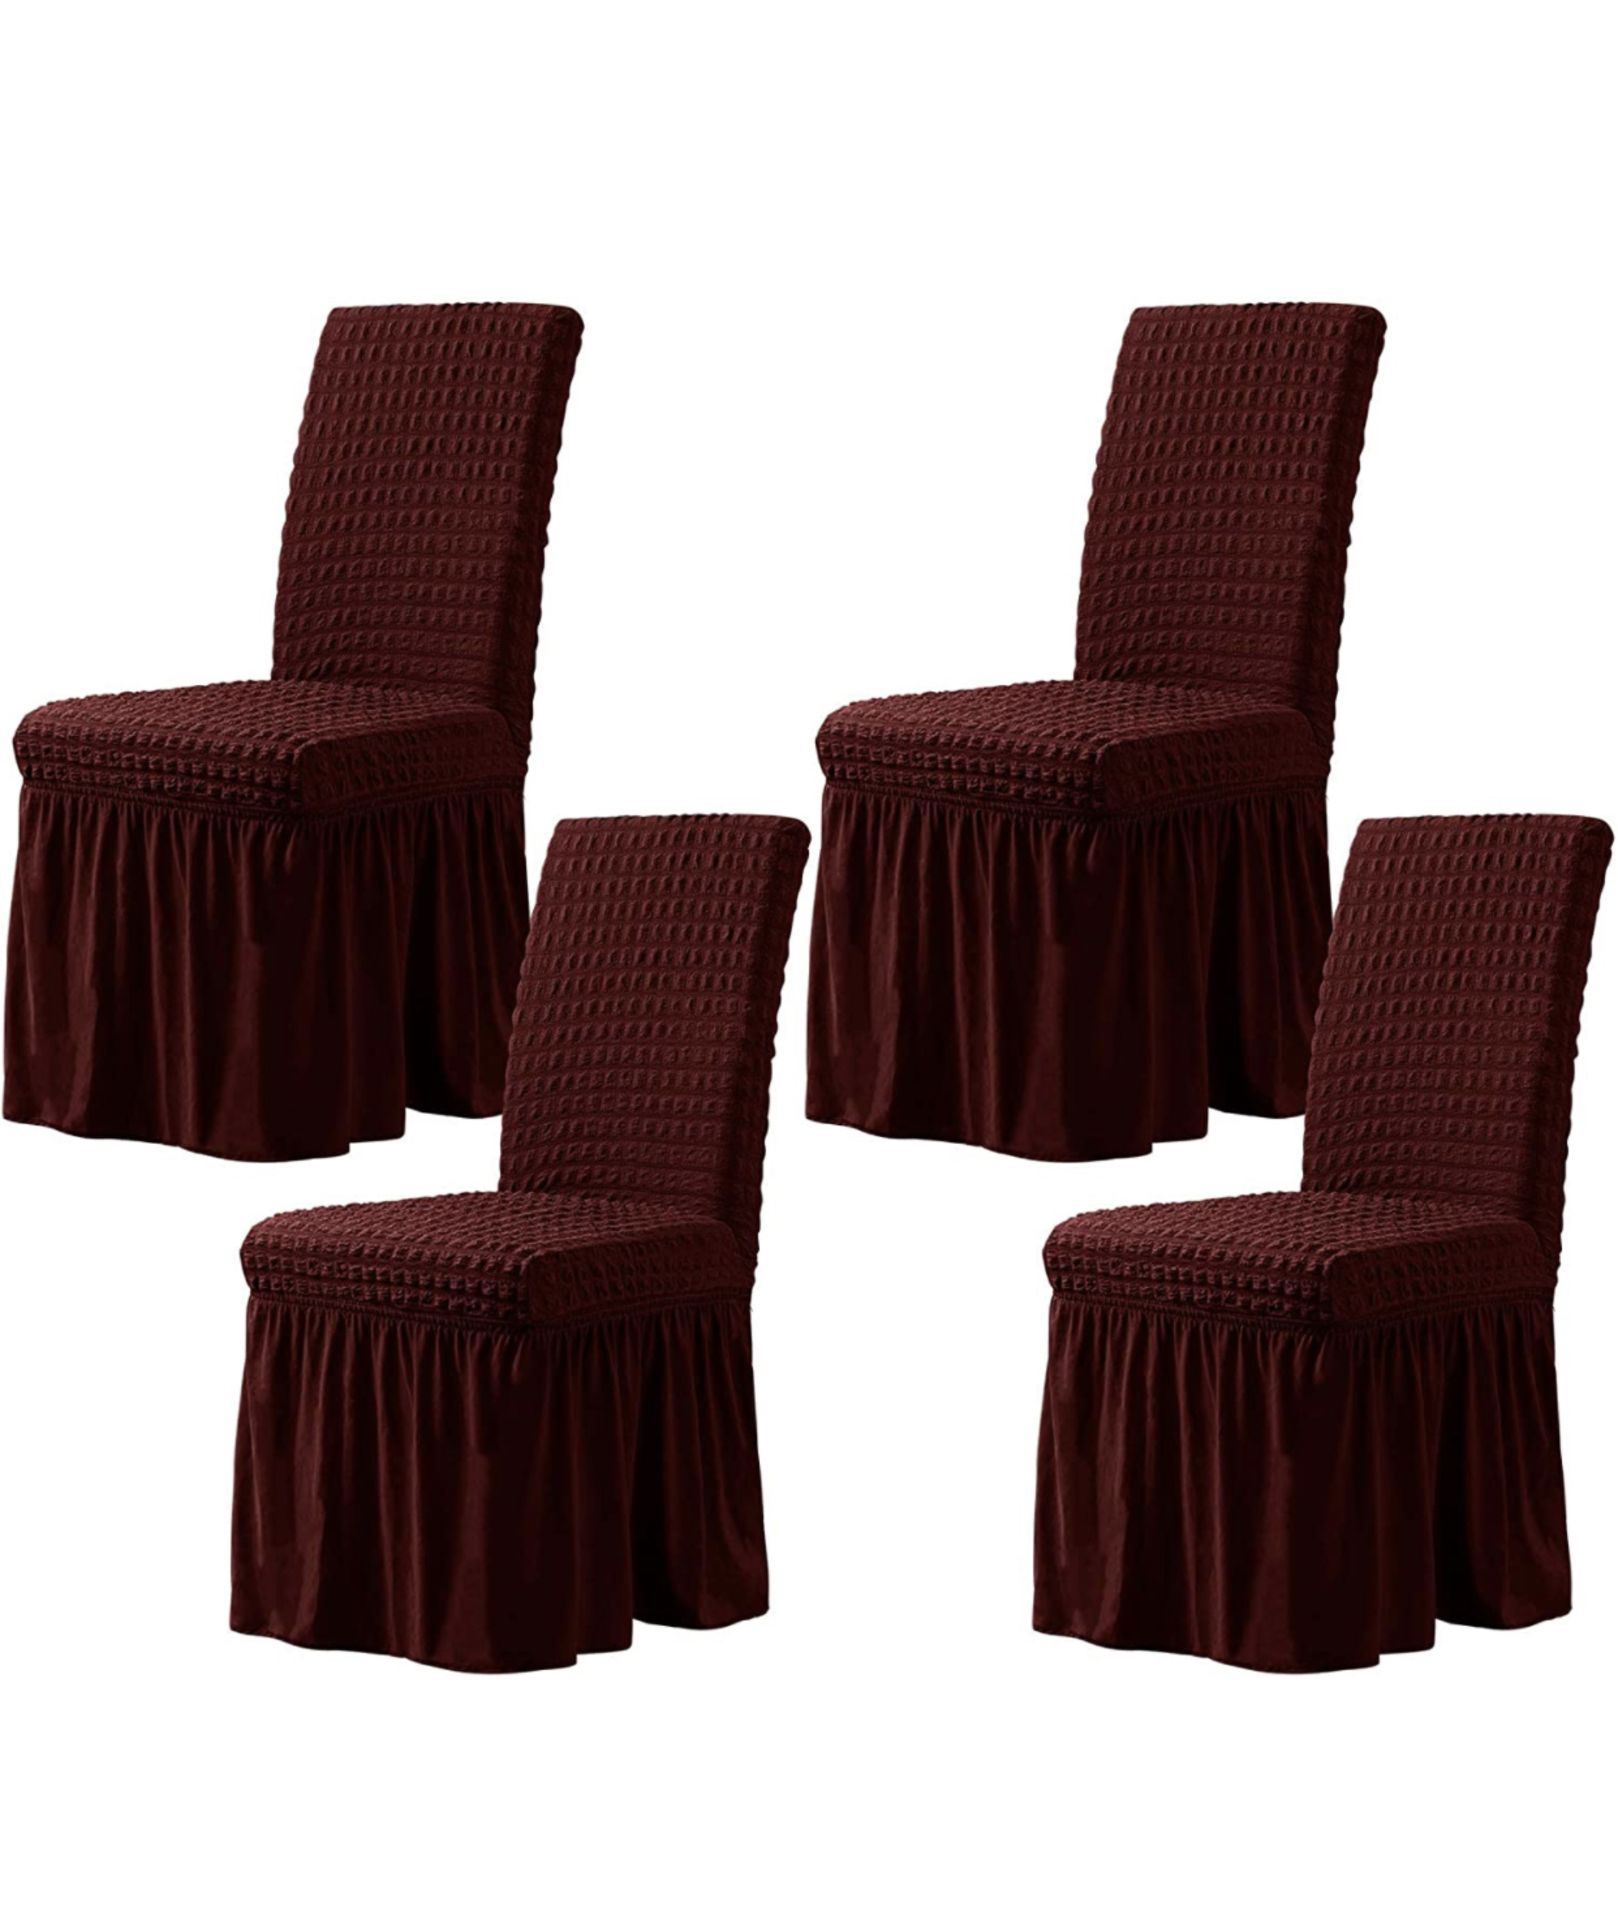 Toyabr 4pcs Stretch Dining Chair Covers with Skirt Spandex RRP £27.99